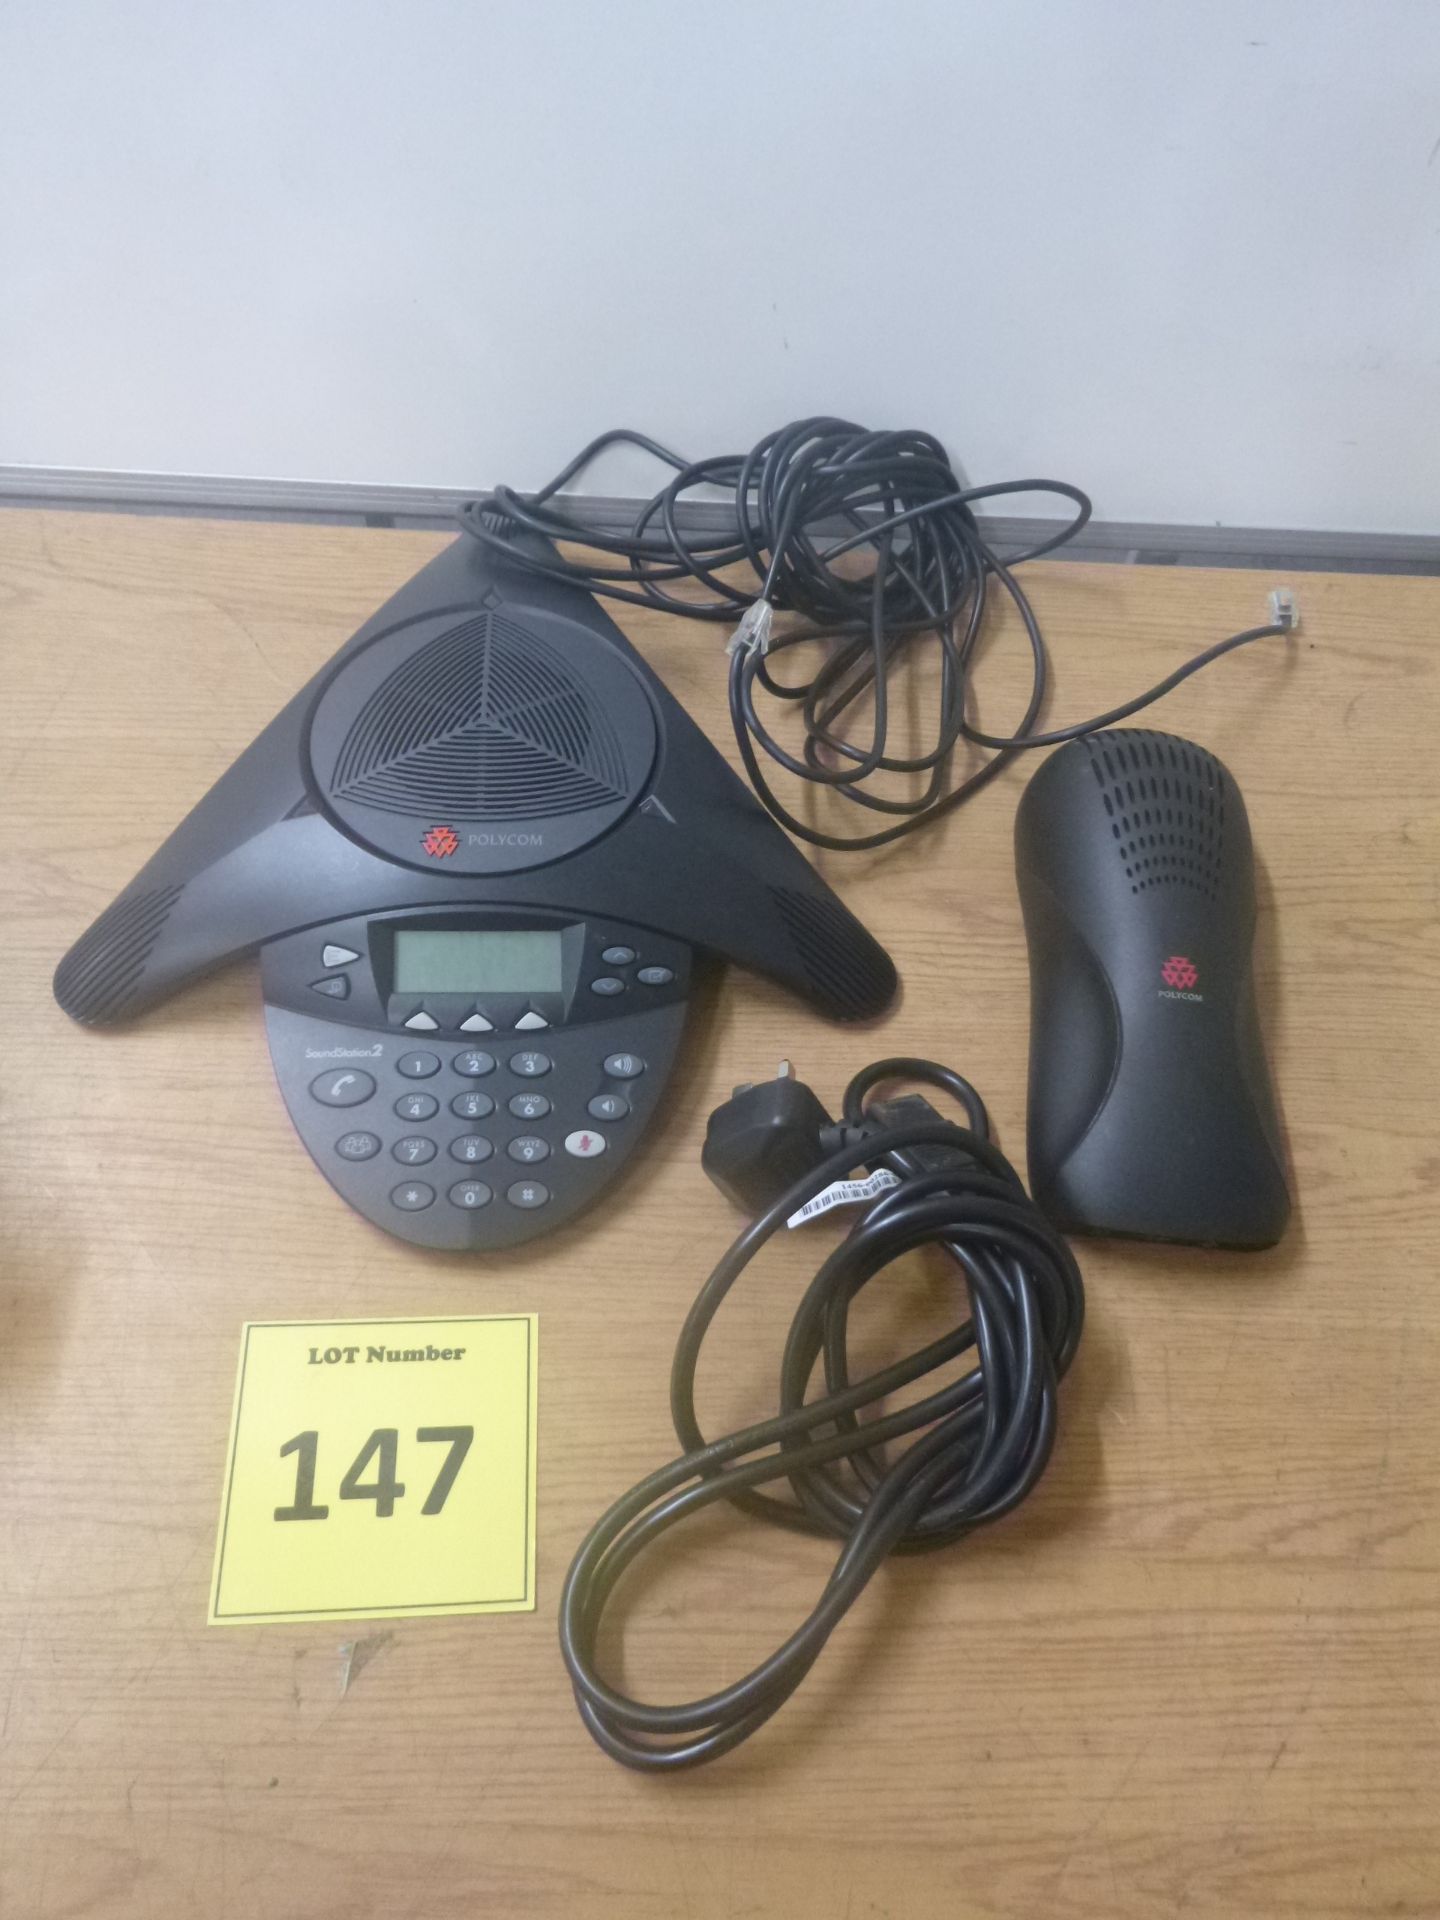 POLYCOM SOUNDSTATION 2 CONFERENCE PHONE WITH SOUNDSTATION 2 UNIVERSAL MODULE AND CABLES.